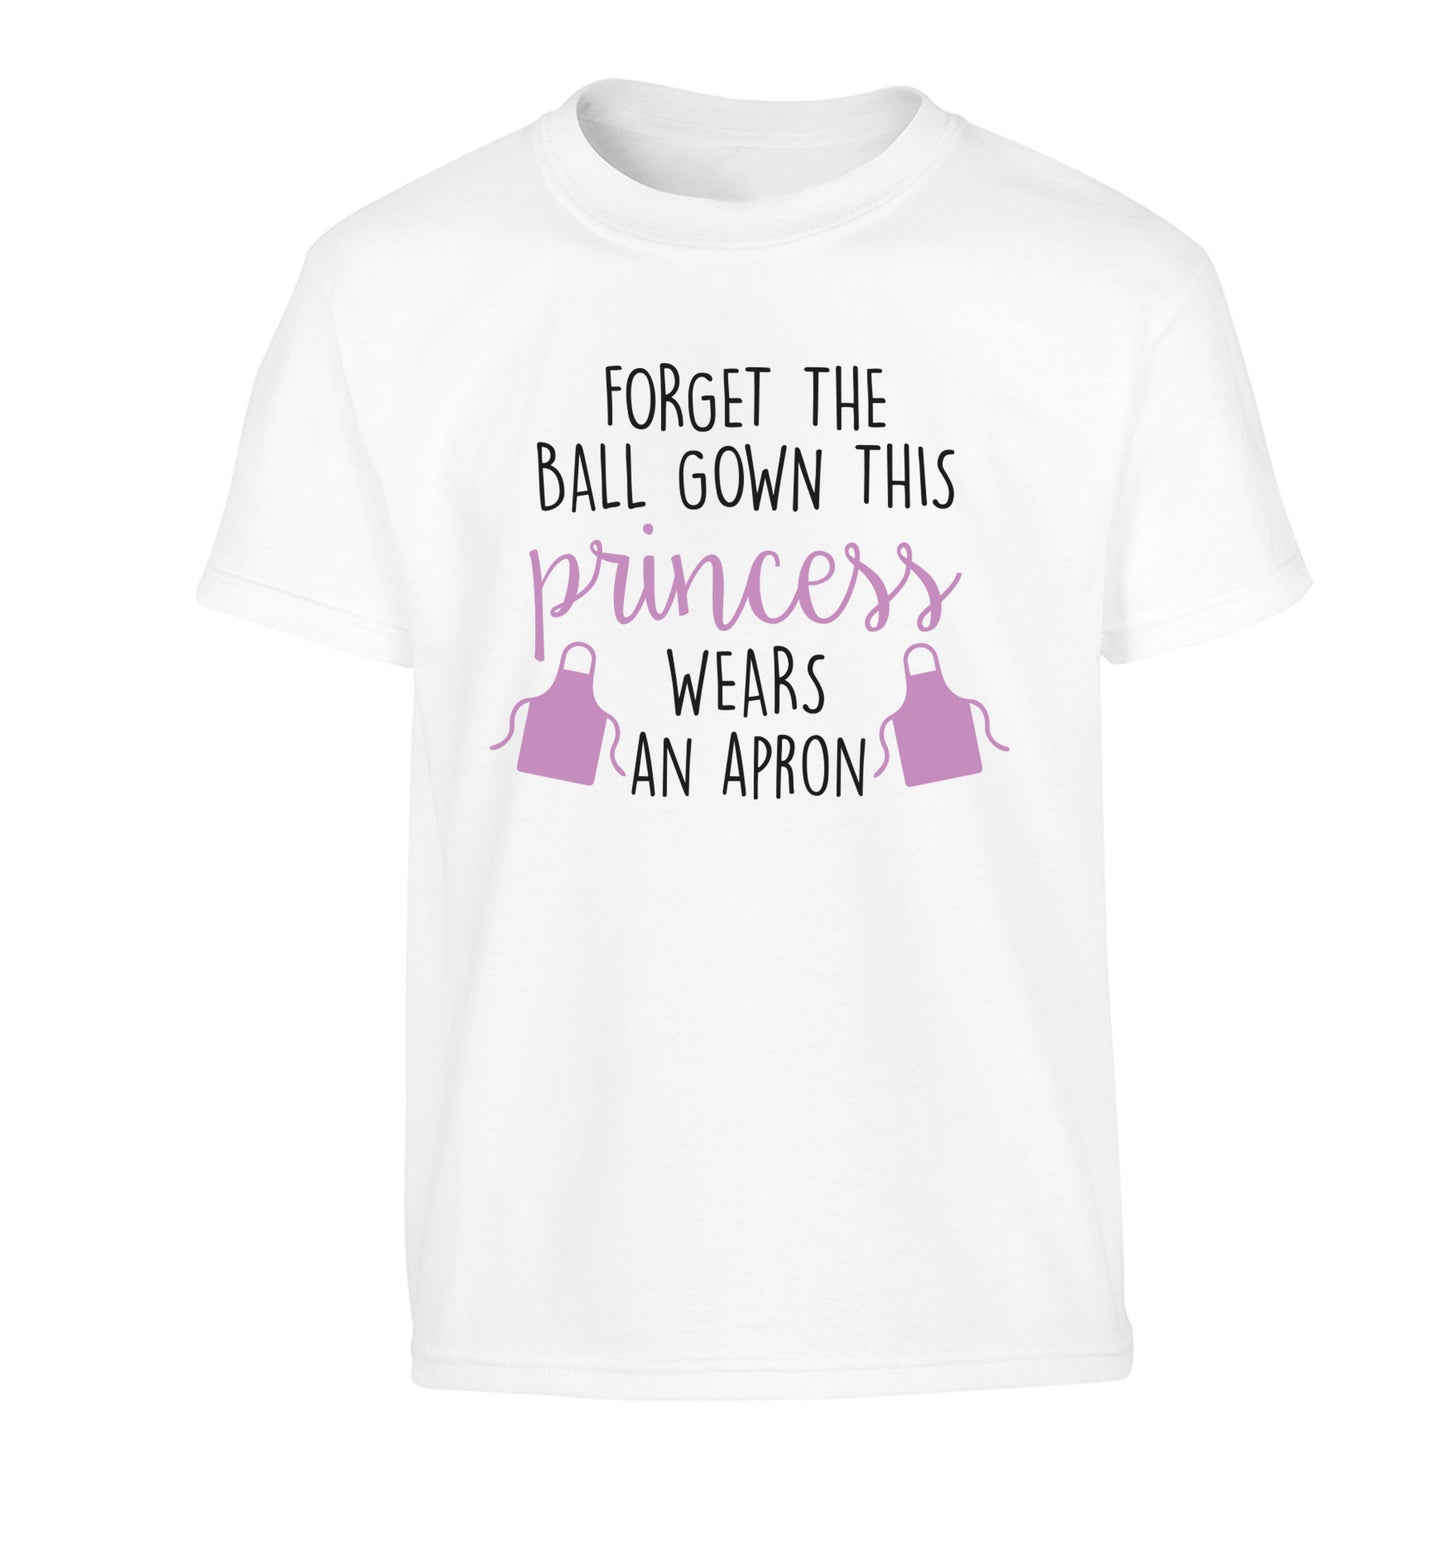 Forget the ball gown this princess wears an apron Children's white Tshirt 12-14 Years